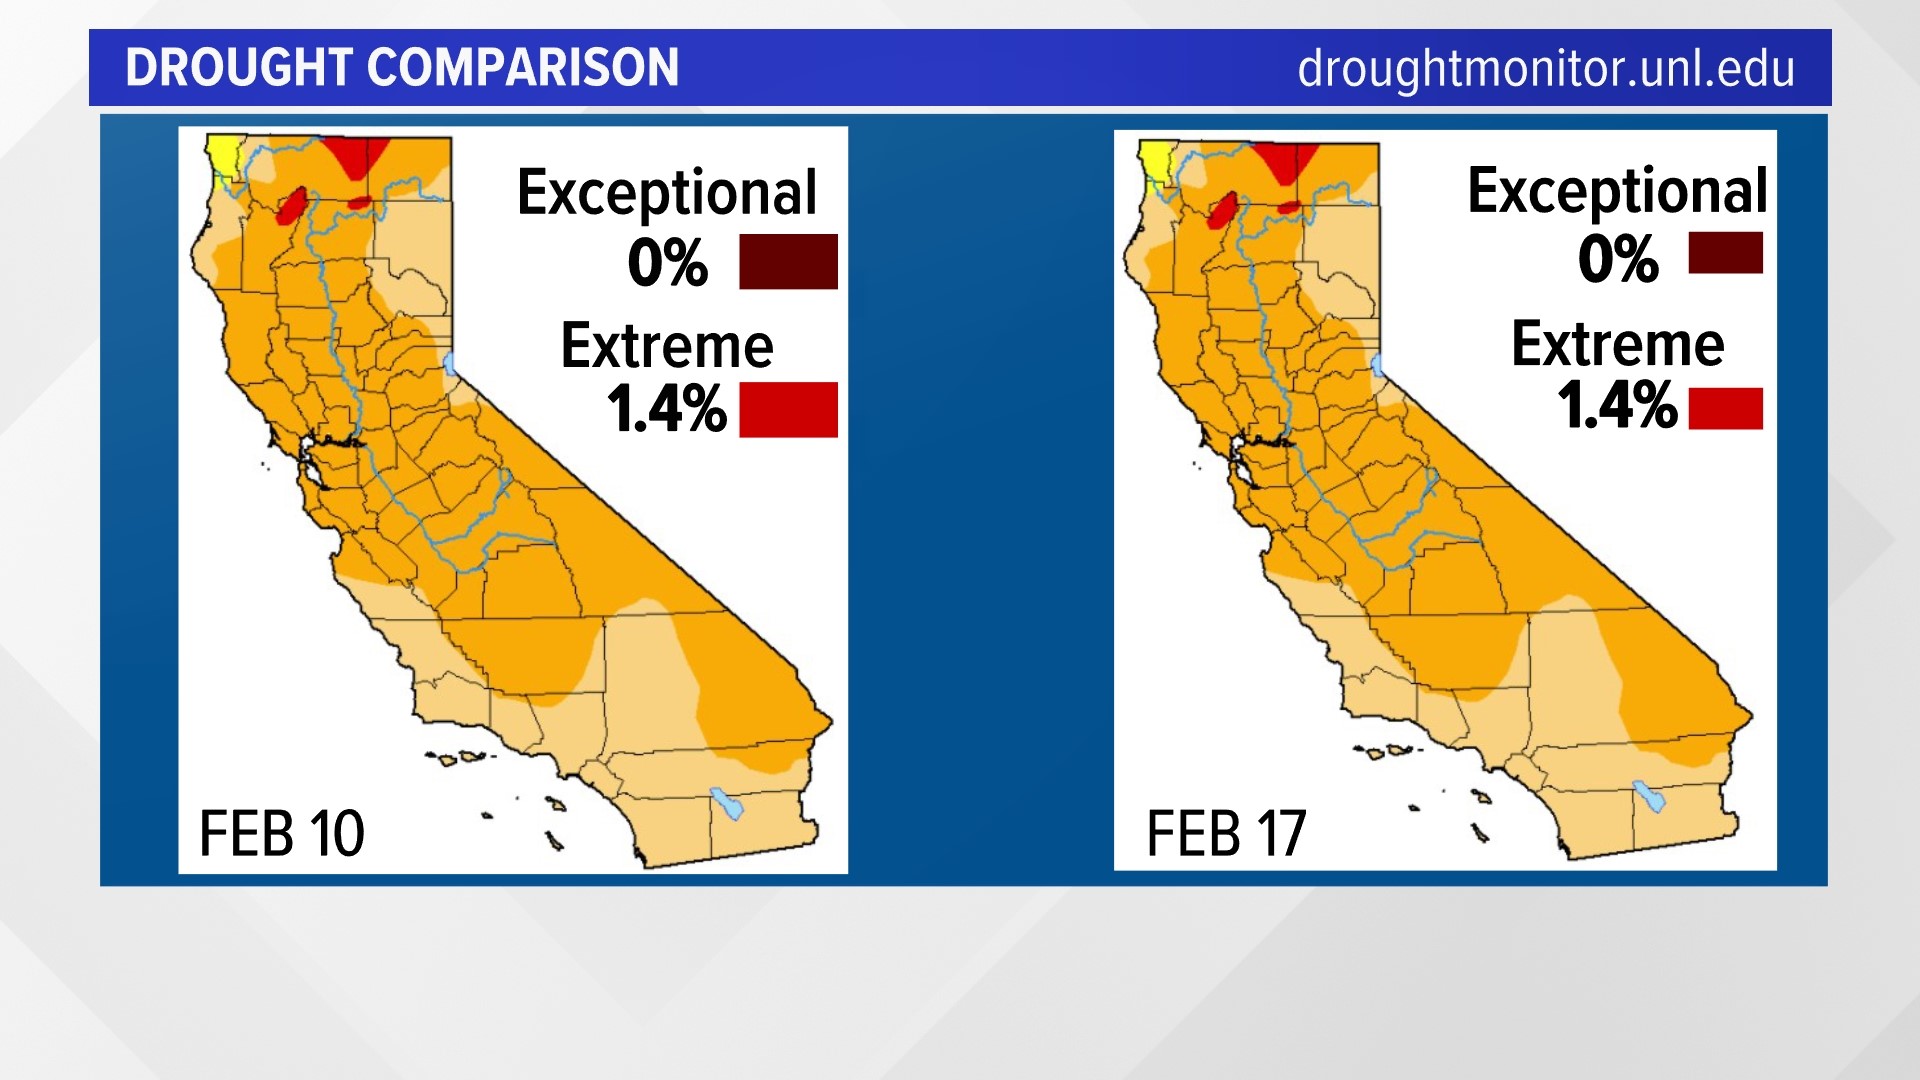 California enters the turning point for improving drought status. Experts say the next couple of weeks are key.